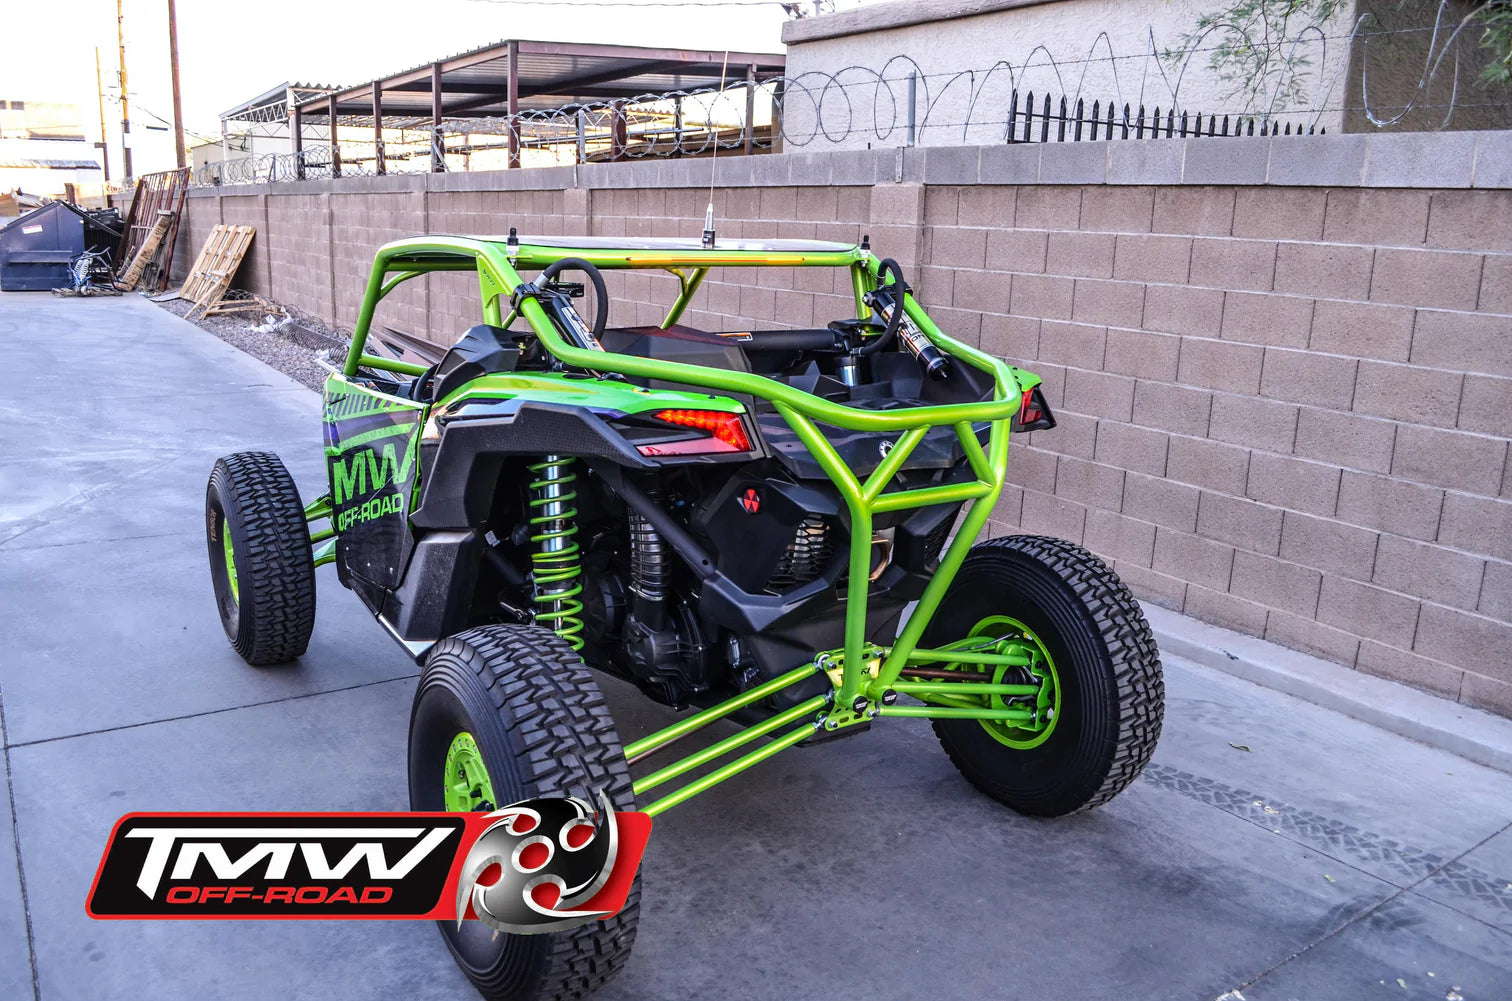 TMW Offroad X3 Stealth 2 seat cage - G Life UTV Shop Parts